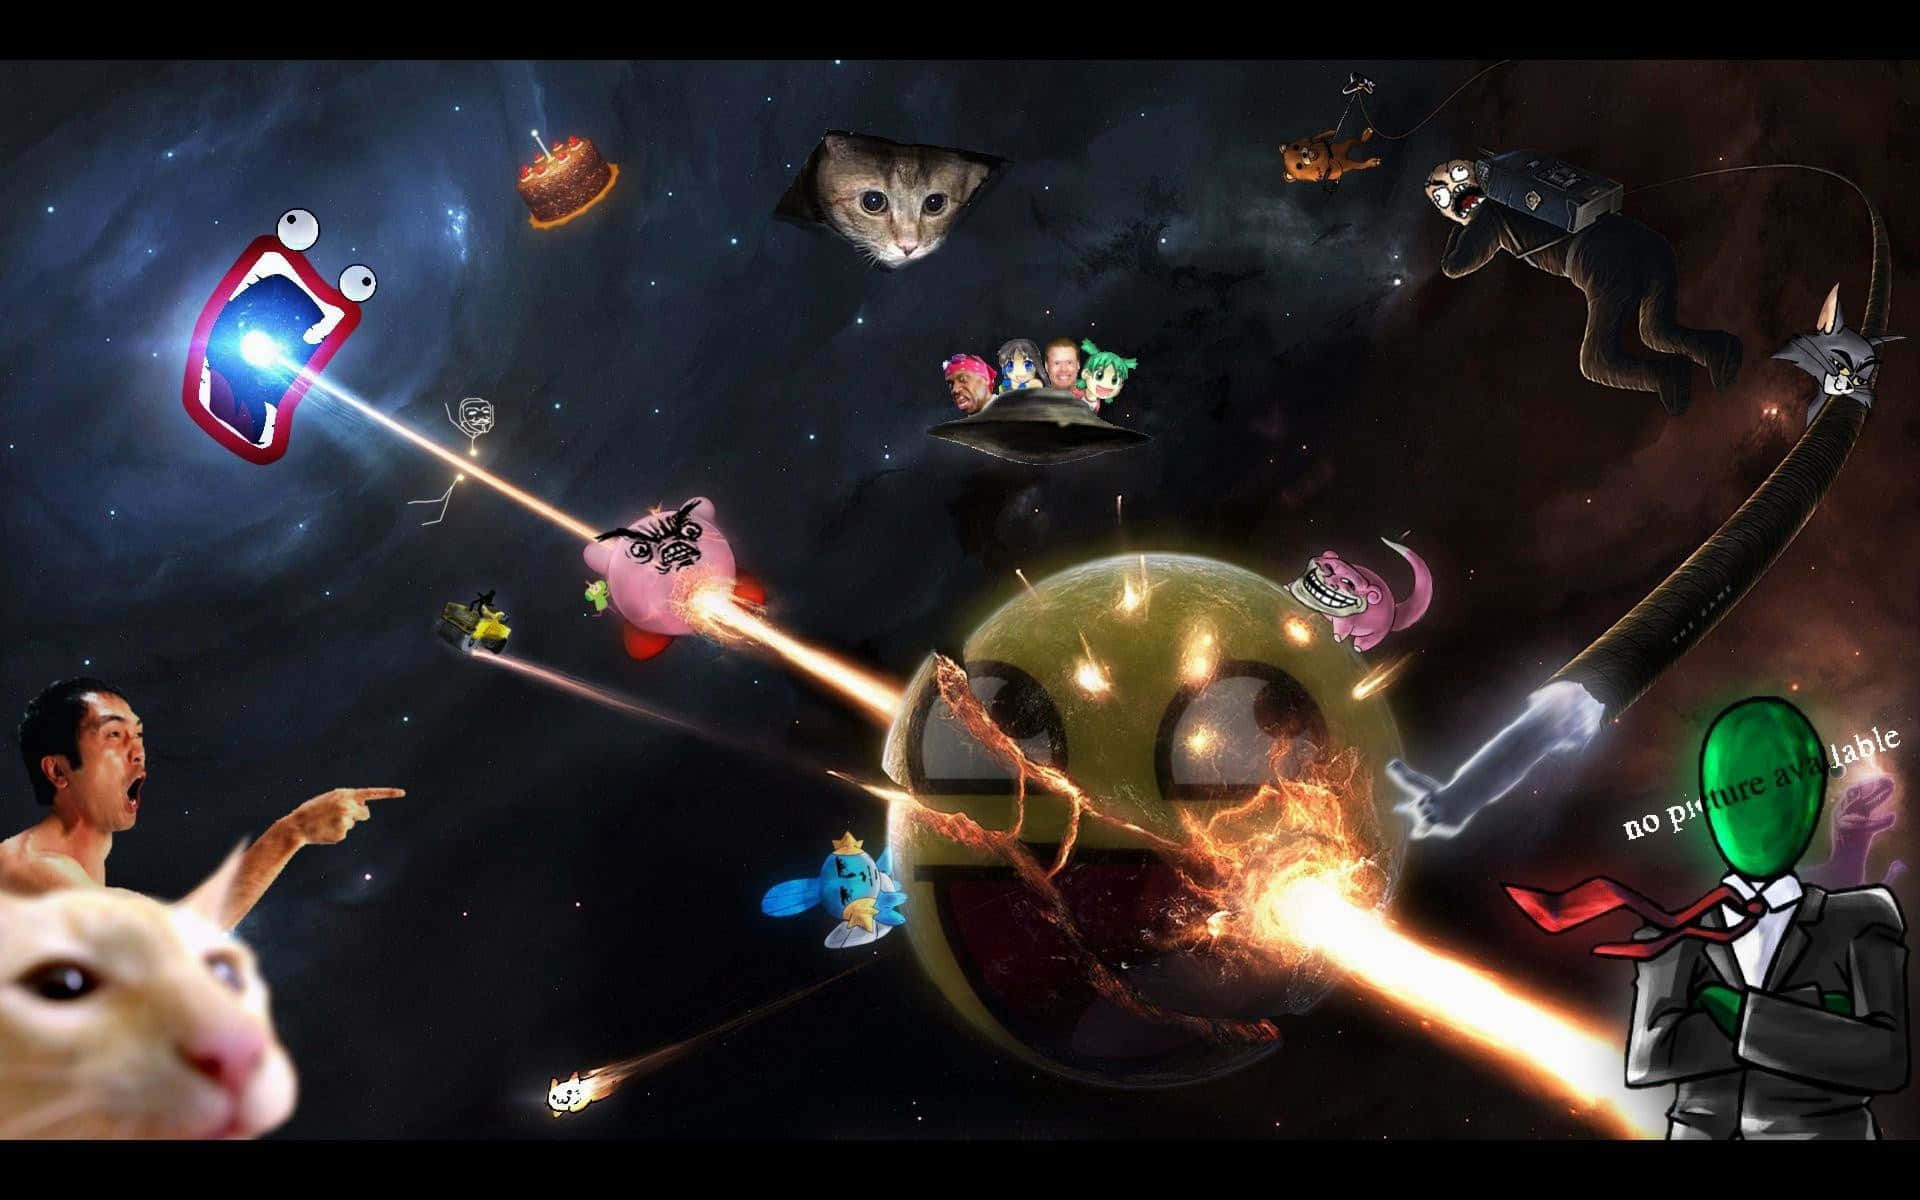 A Cat Is Flying In Space With A Cat In A Suit